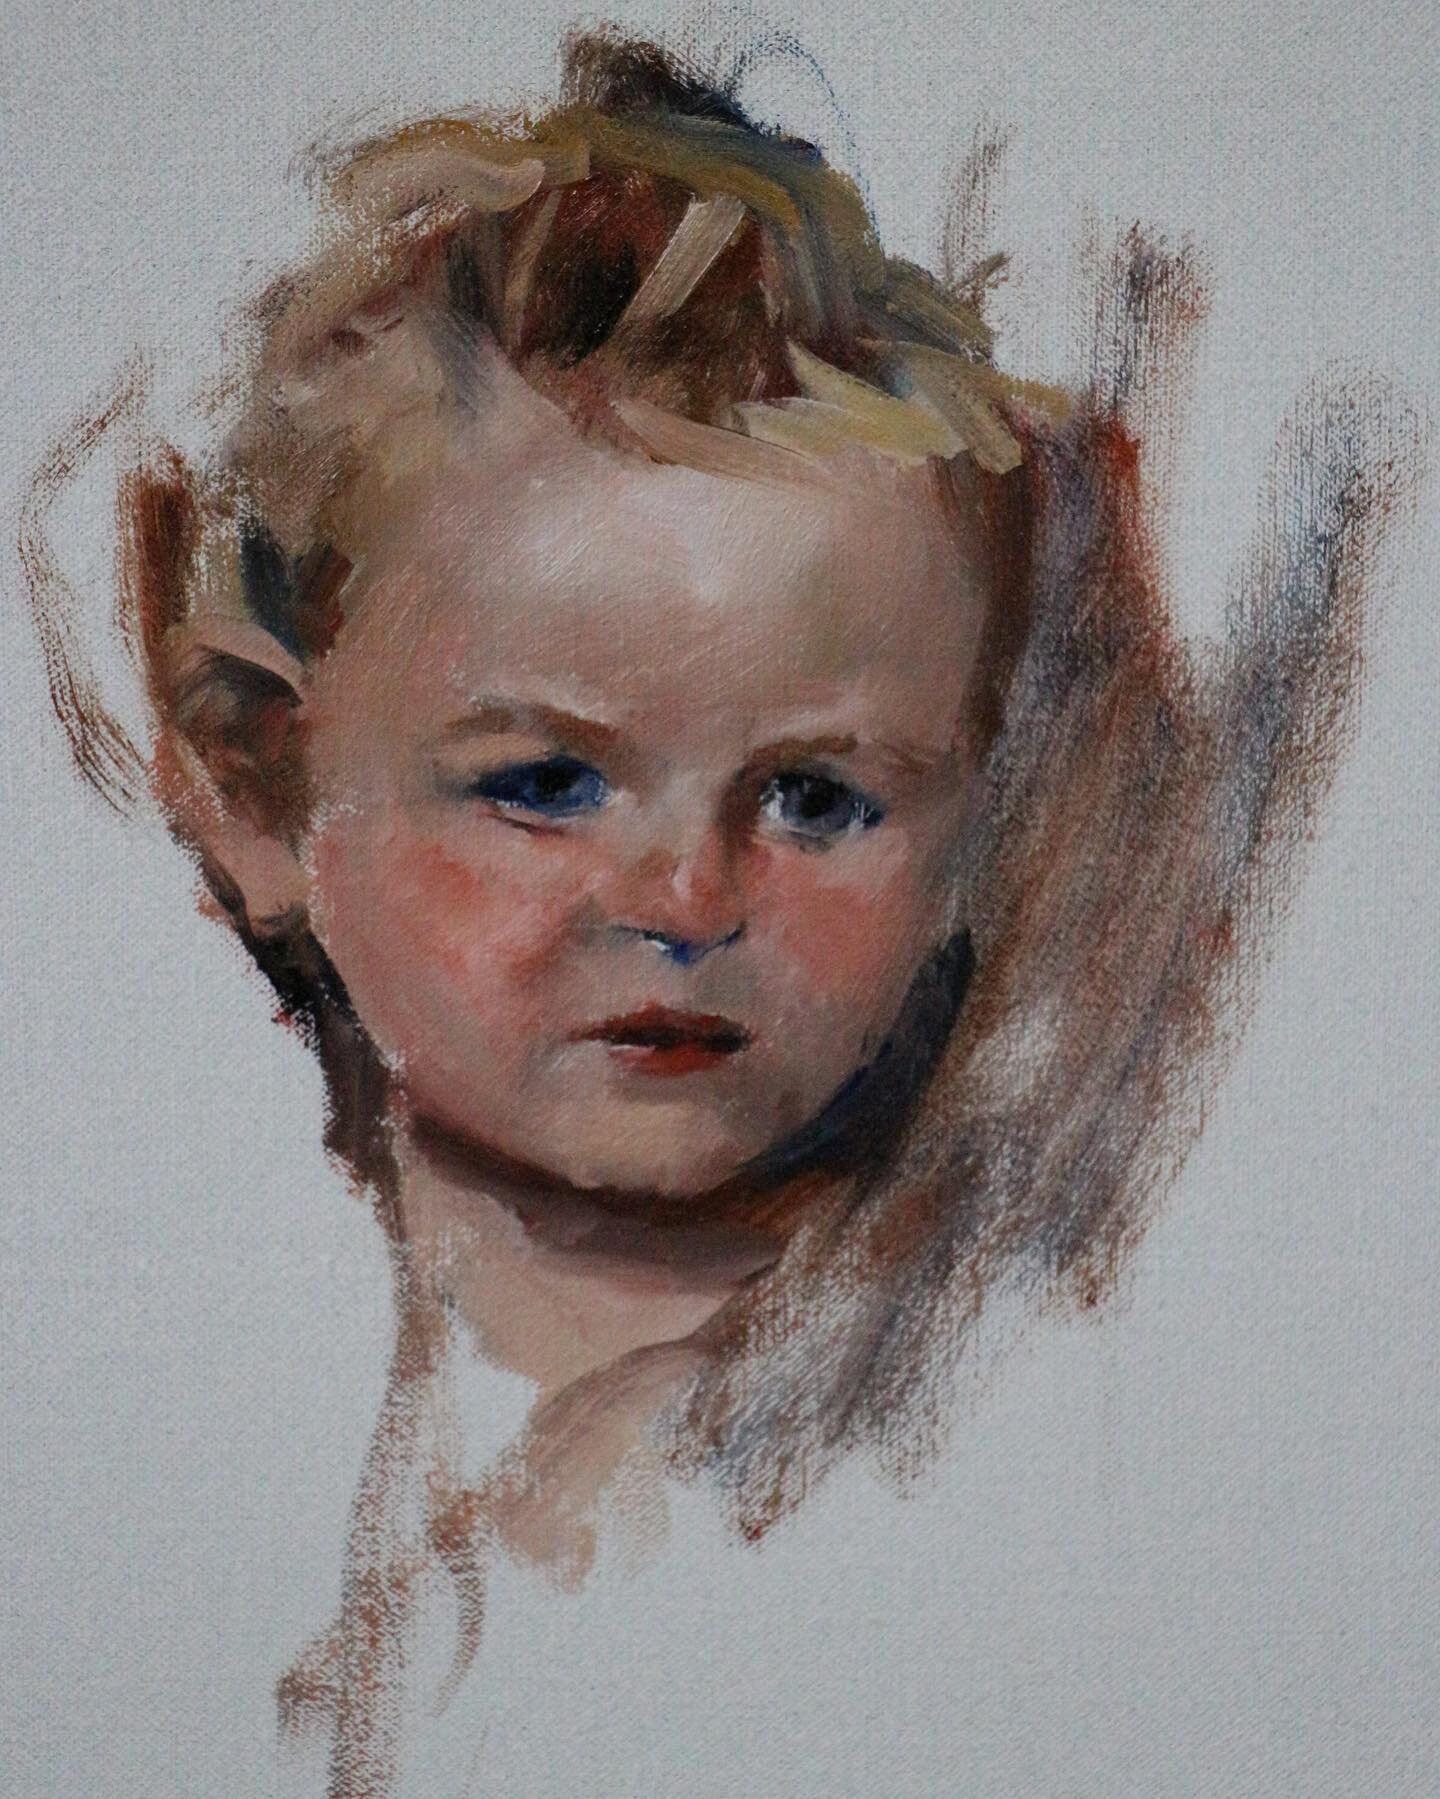 40 min oil sketch of my niece&rsquo;s 2 year old while he watched cartoons
.
.
.
#oilsketch #oilpainting #contemporary #nickbashall #oilpaint #lifepainting #oiloncanvas #paintingfromlife